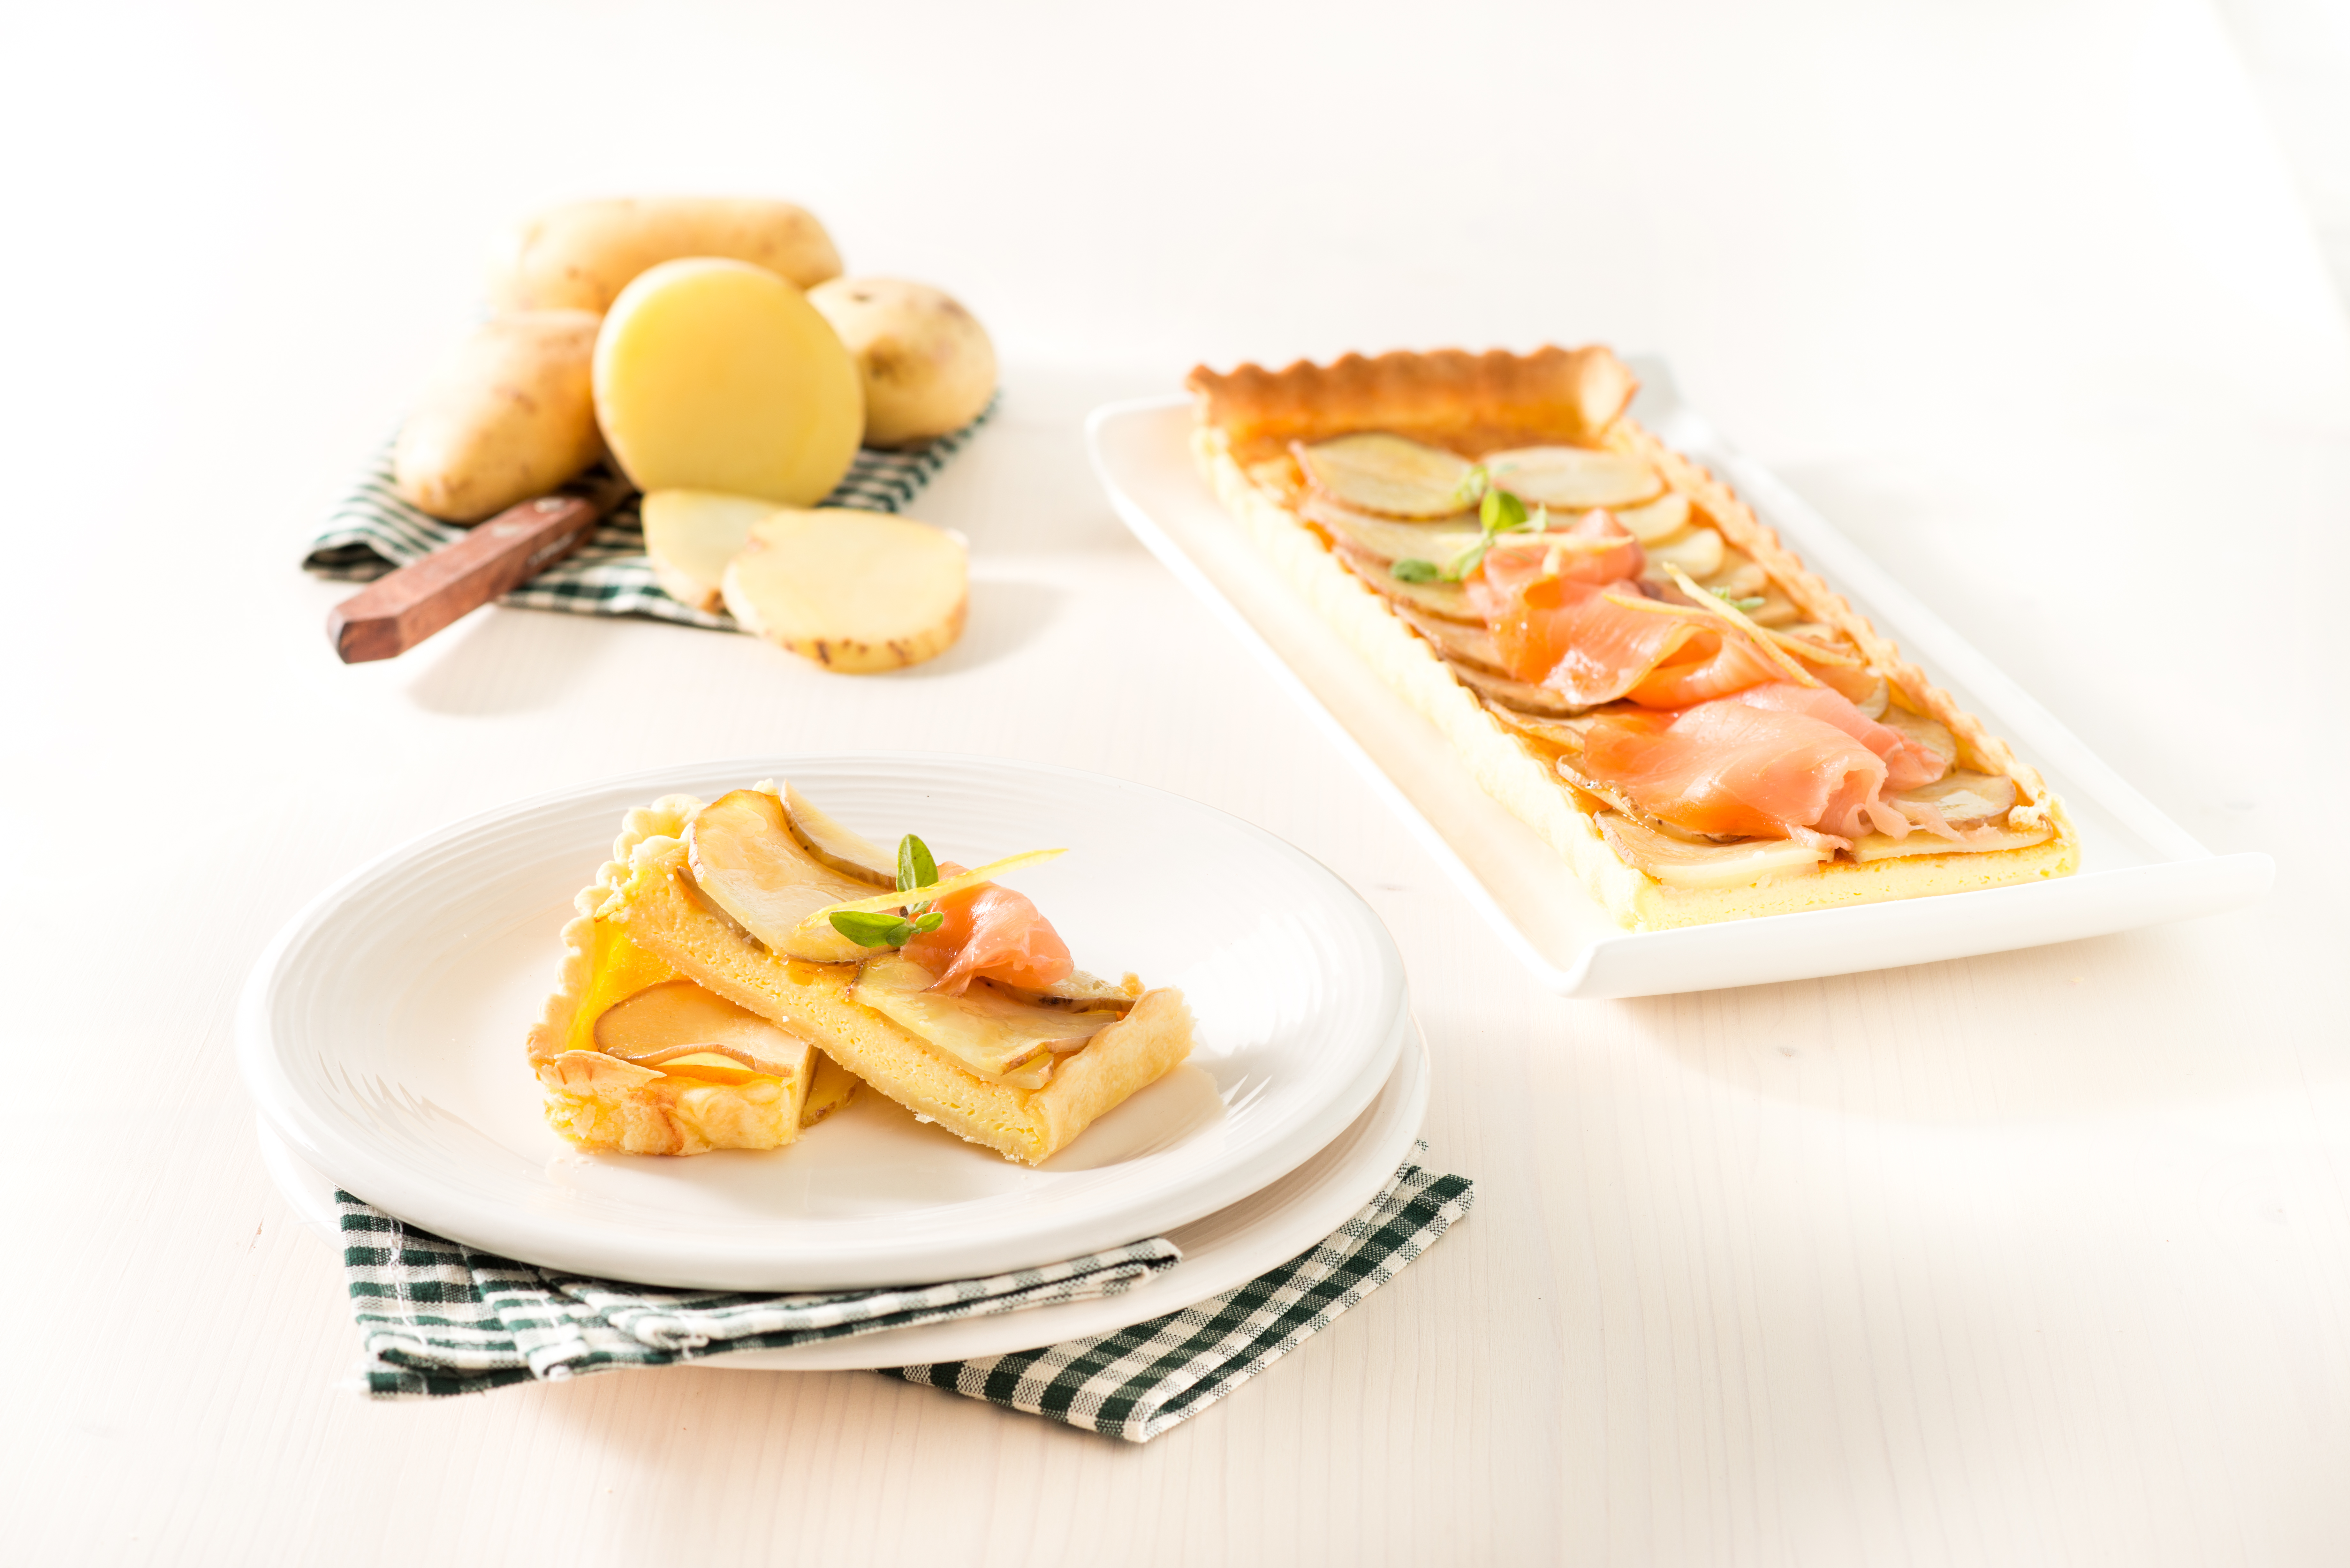 Savory pie with gluten-free potatoes, salad and grilled salmon 